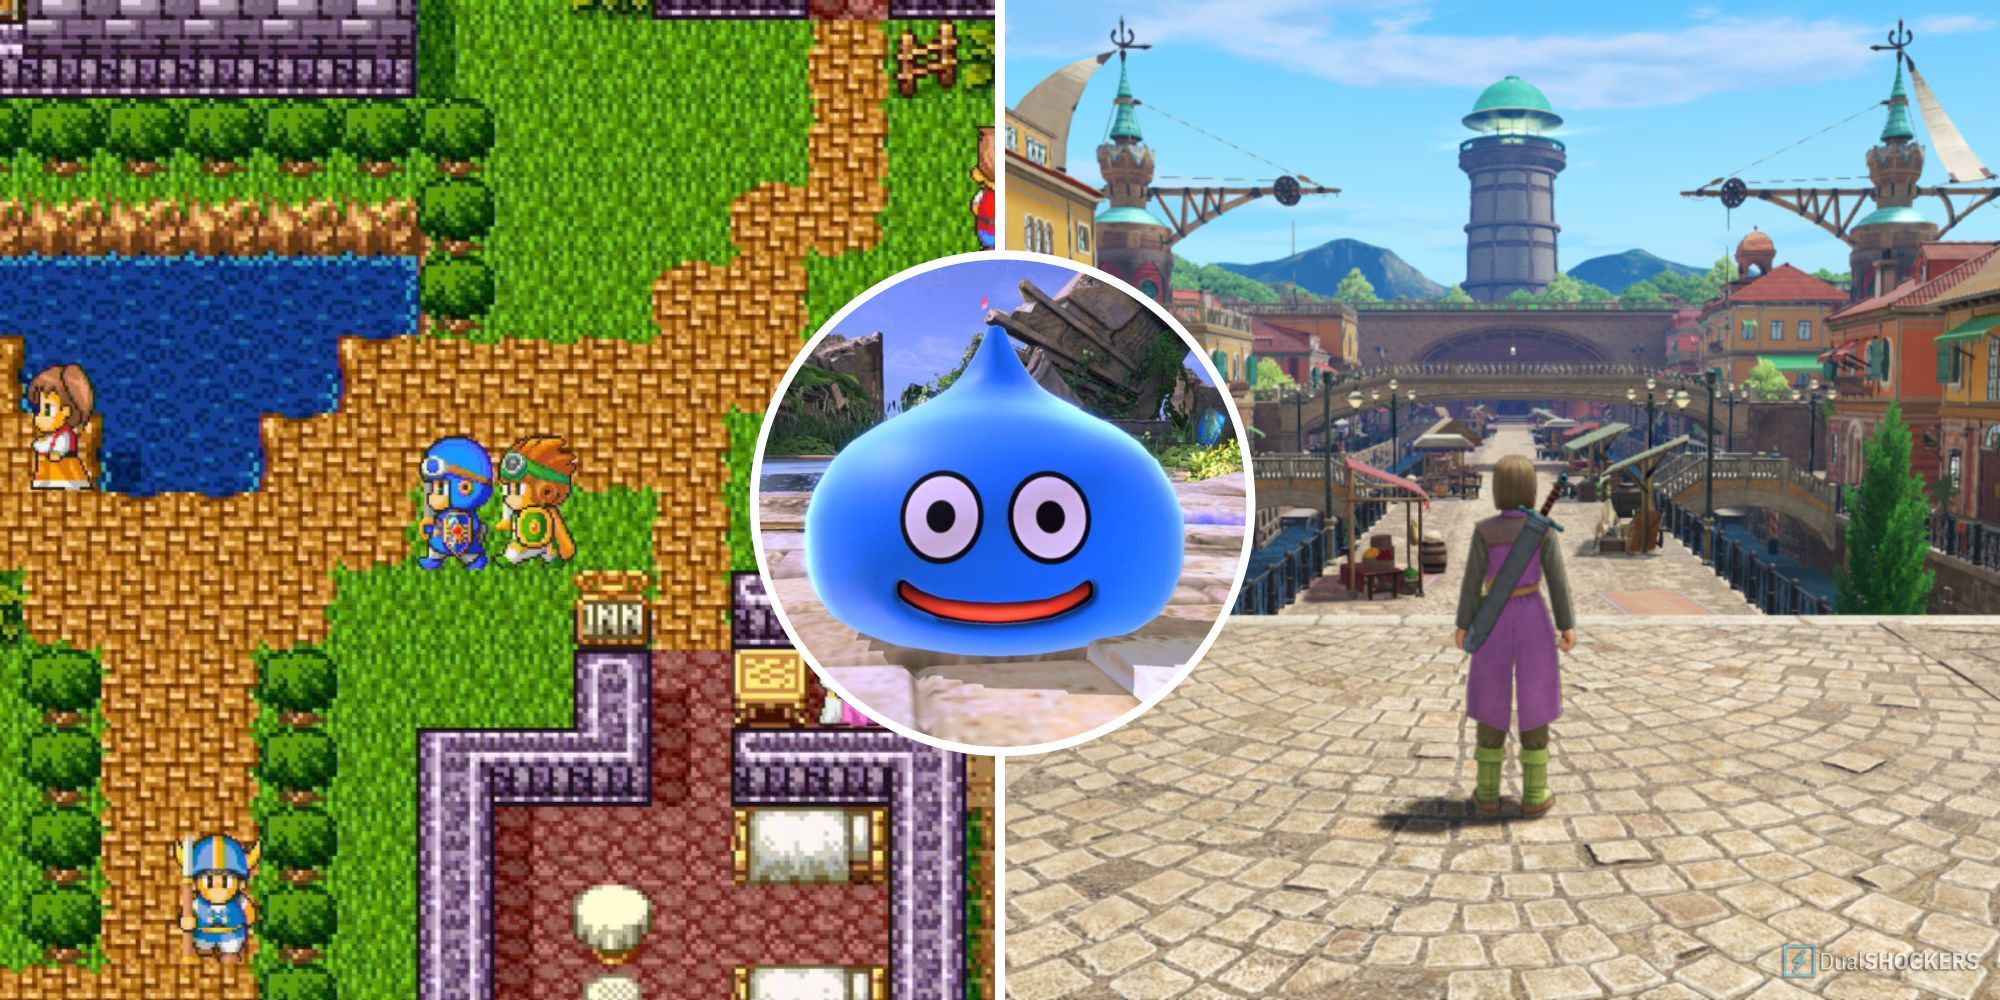 Dragon Quest All Mainline Games In The Franchise Feature Image Heroes Hero Slime